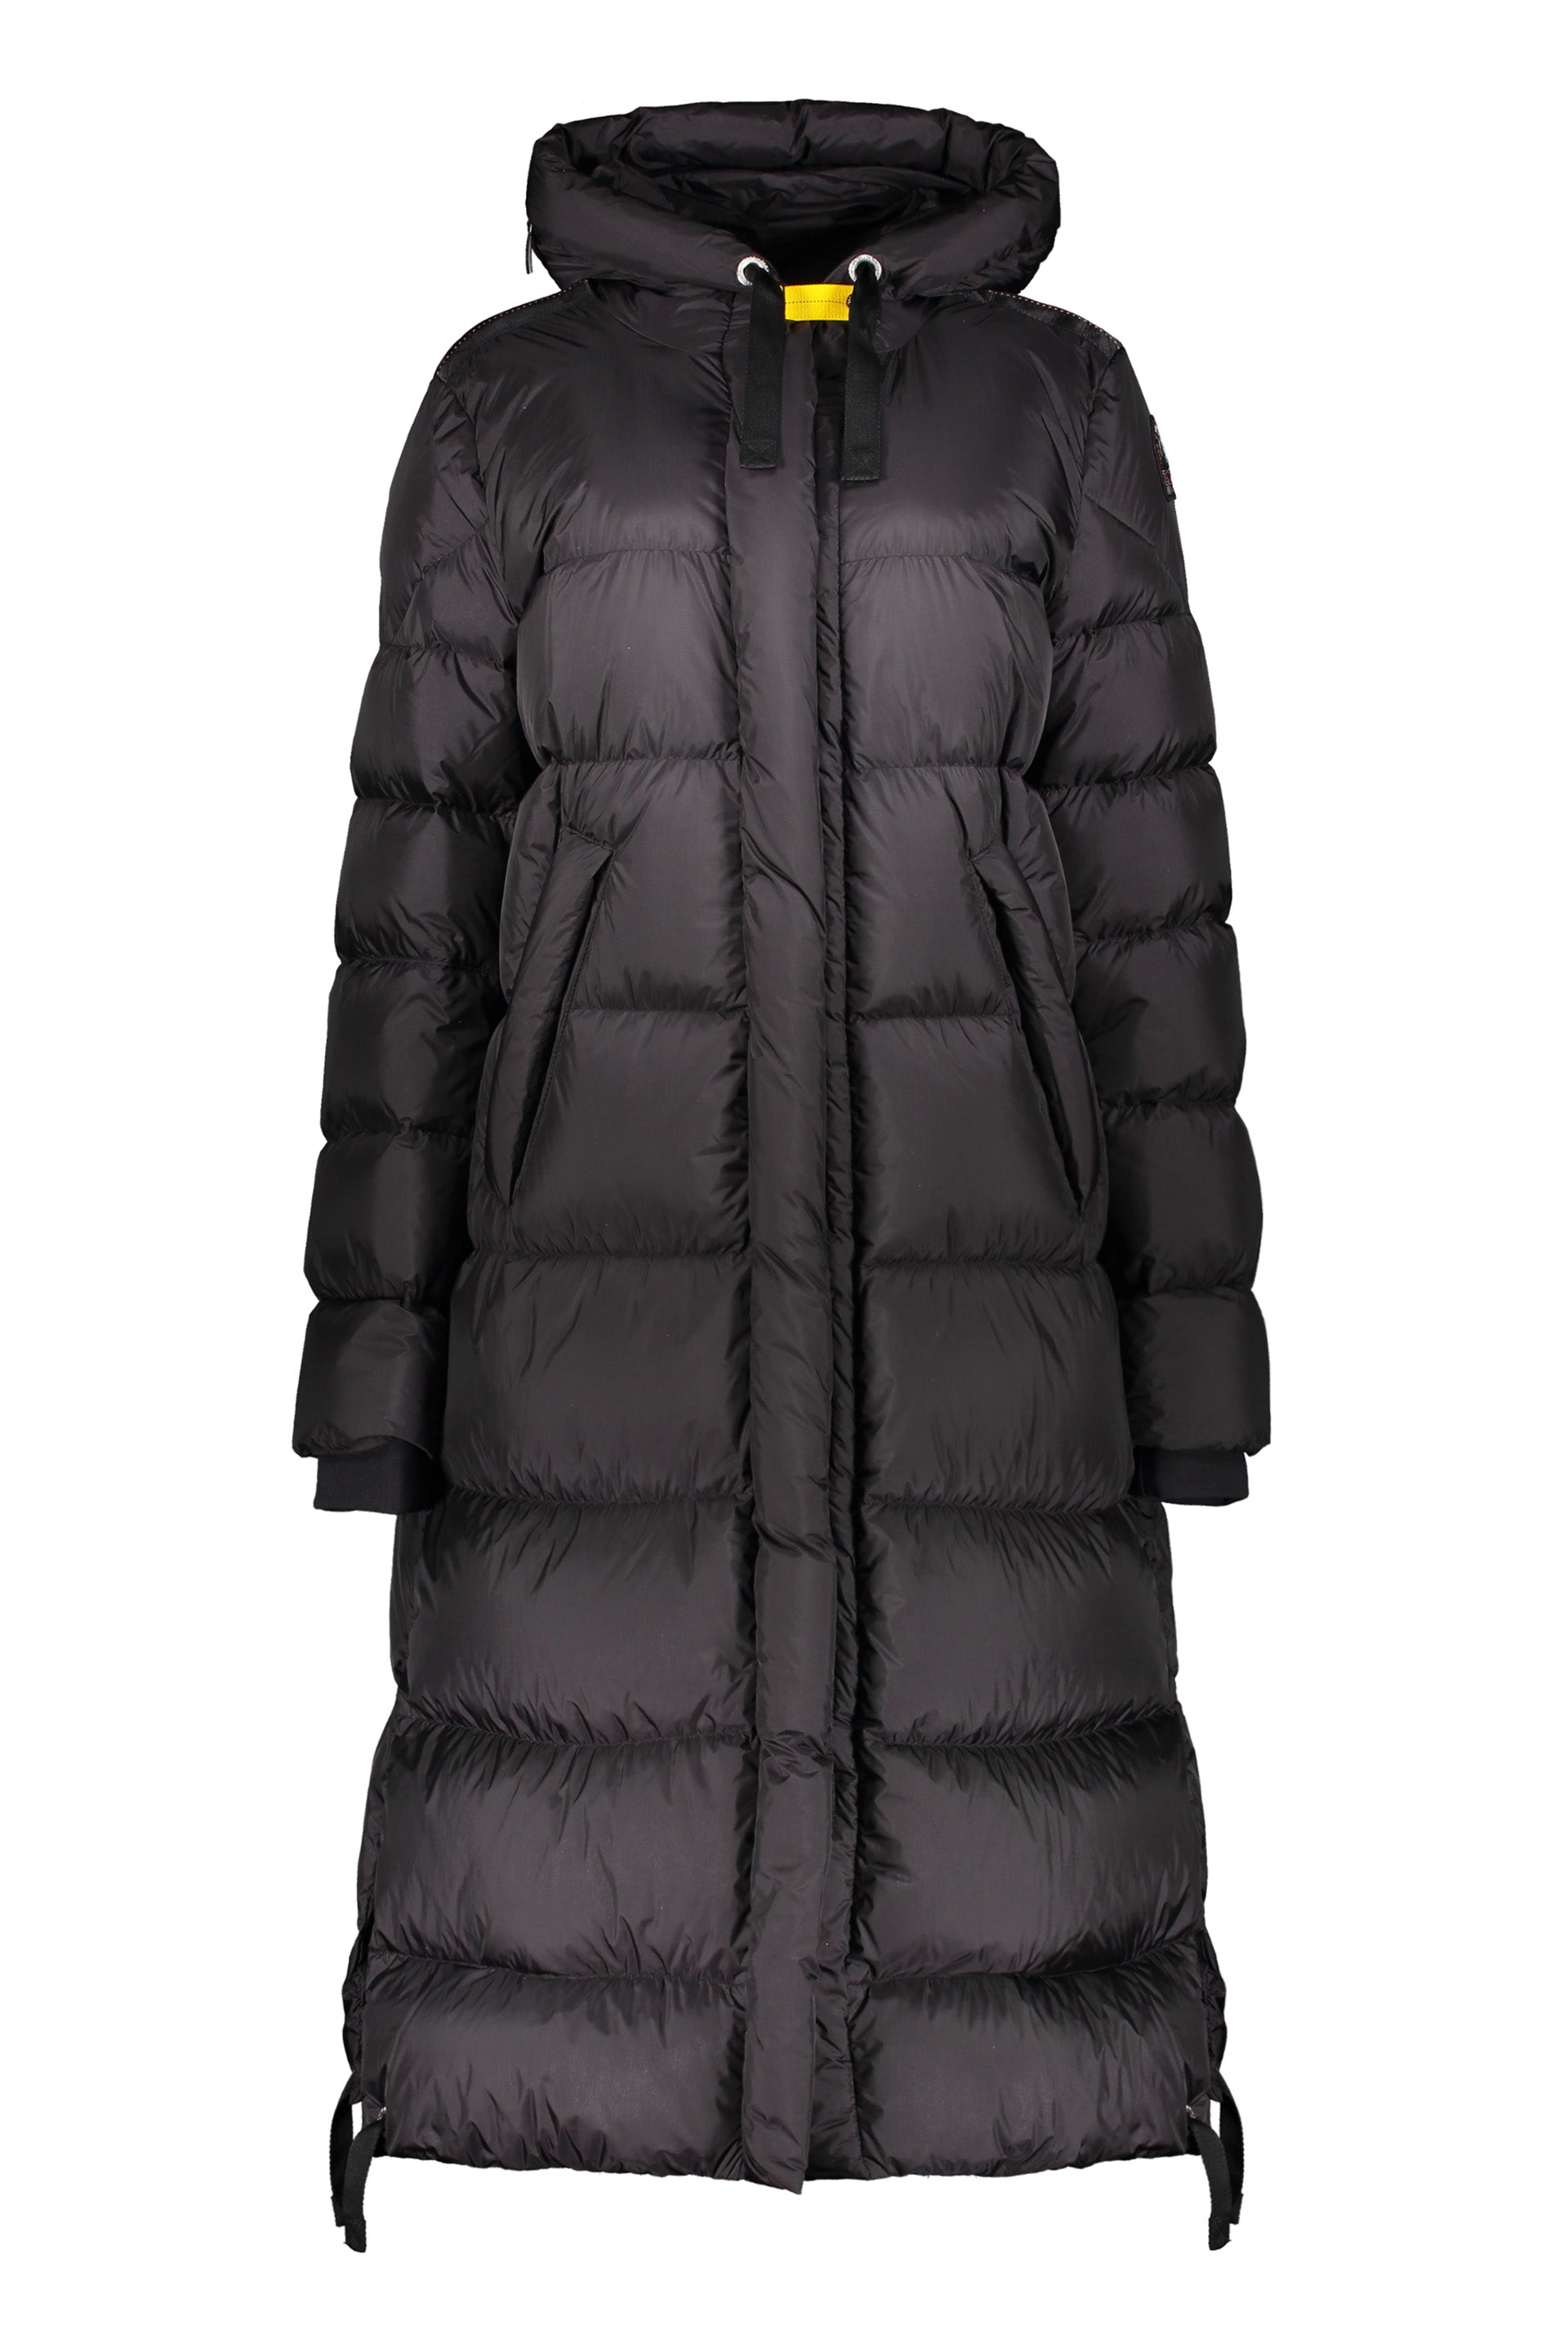 Parajumpers-OUTLET-SALE-Mummy-long-hooded-down-jacket-Jacken-Mantel-M-ARCHIVE-COLLECTION.jpg